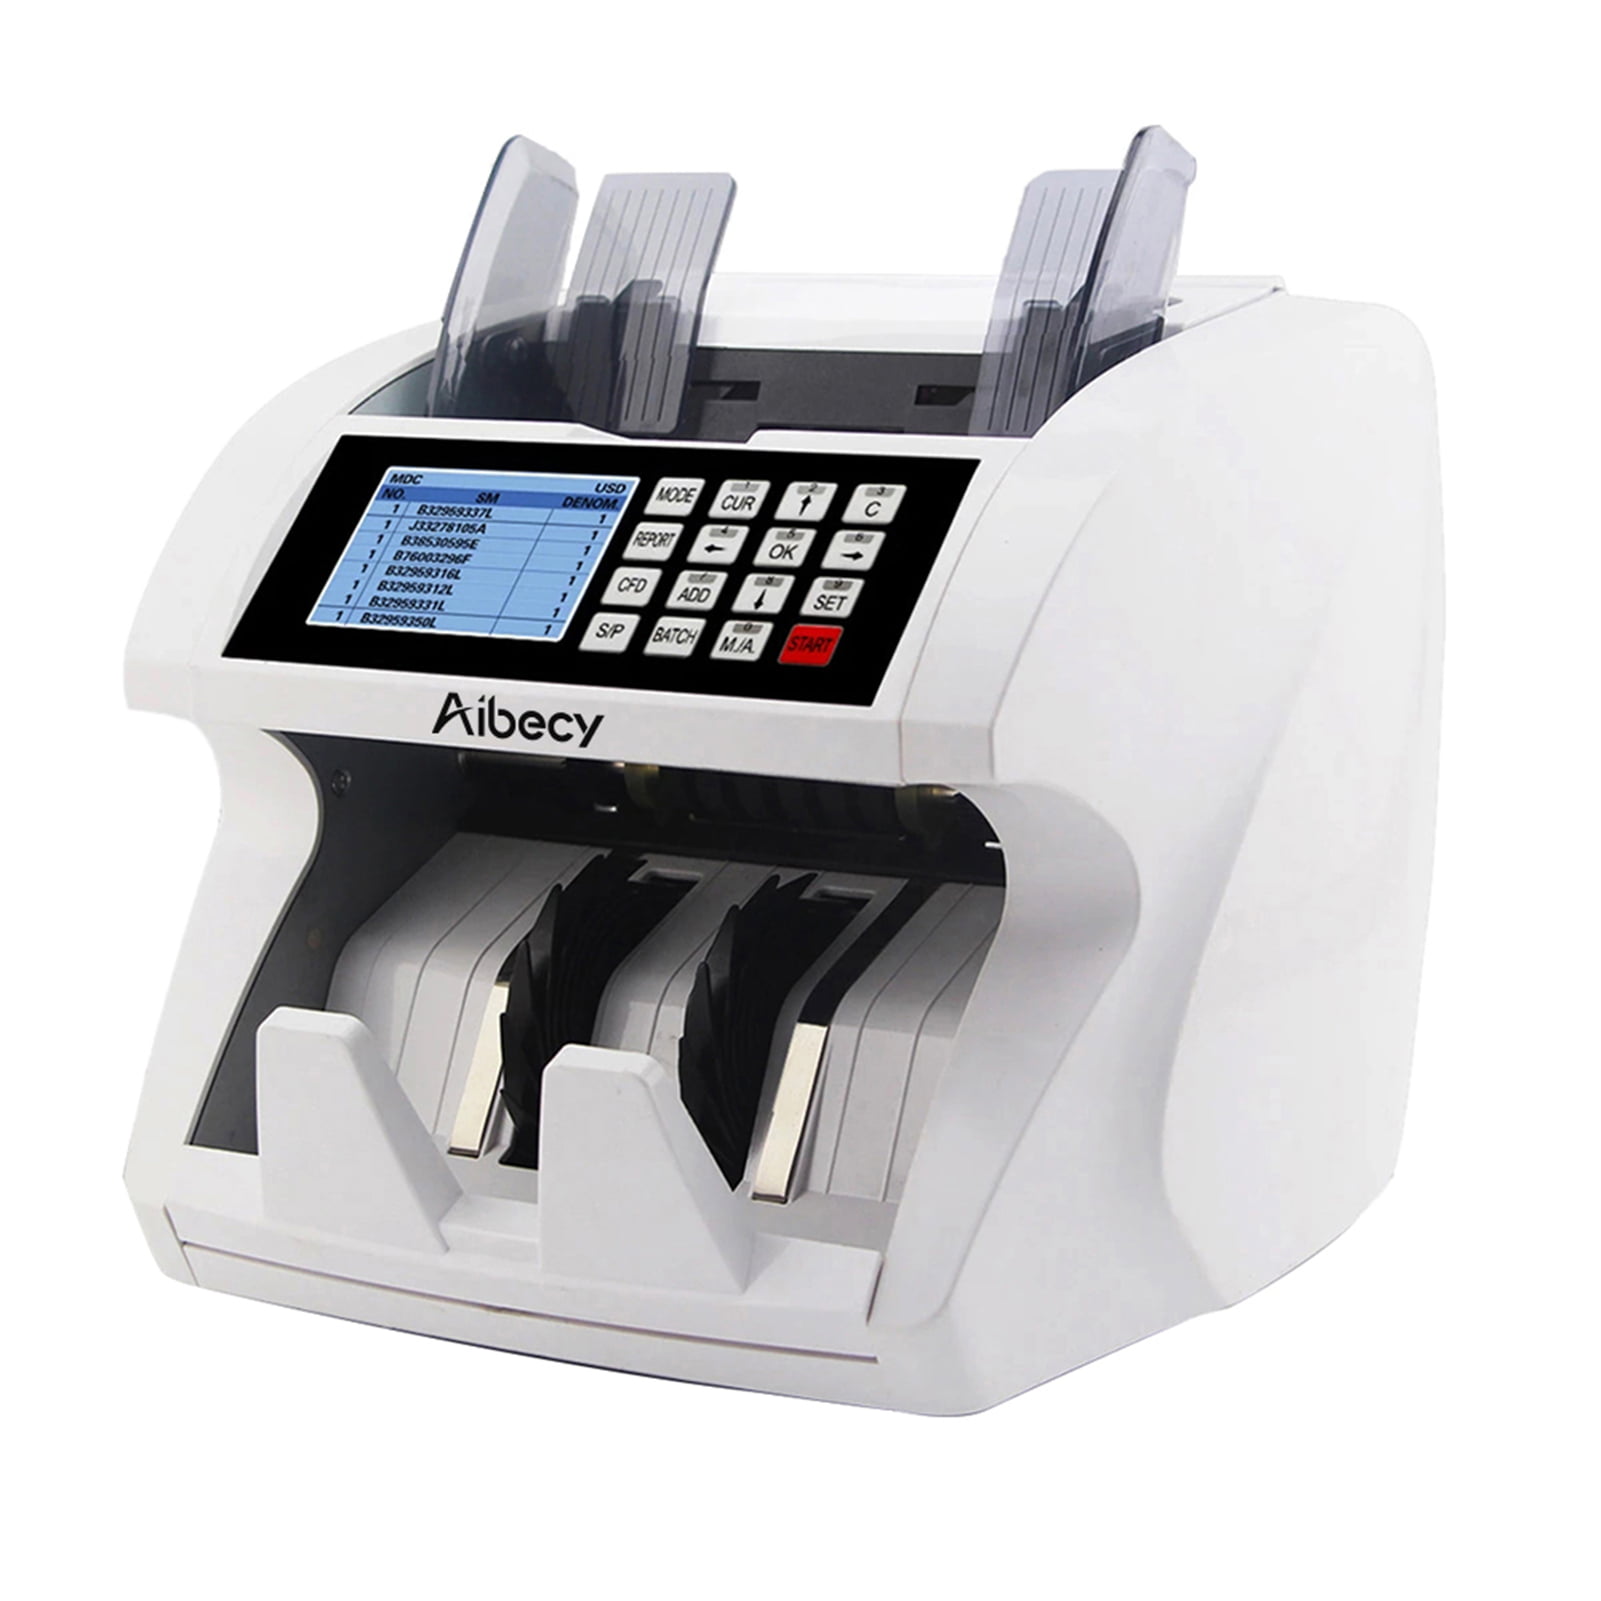 Bank Note Banknote Money Cash Currency Value Count Counter Fake Detector Machine 